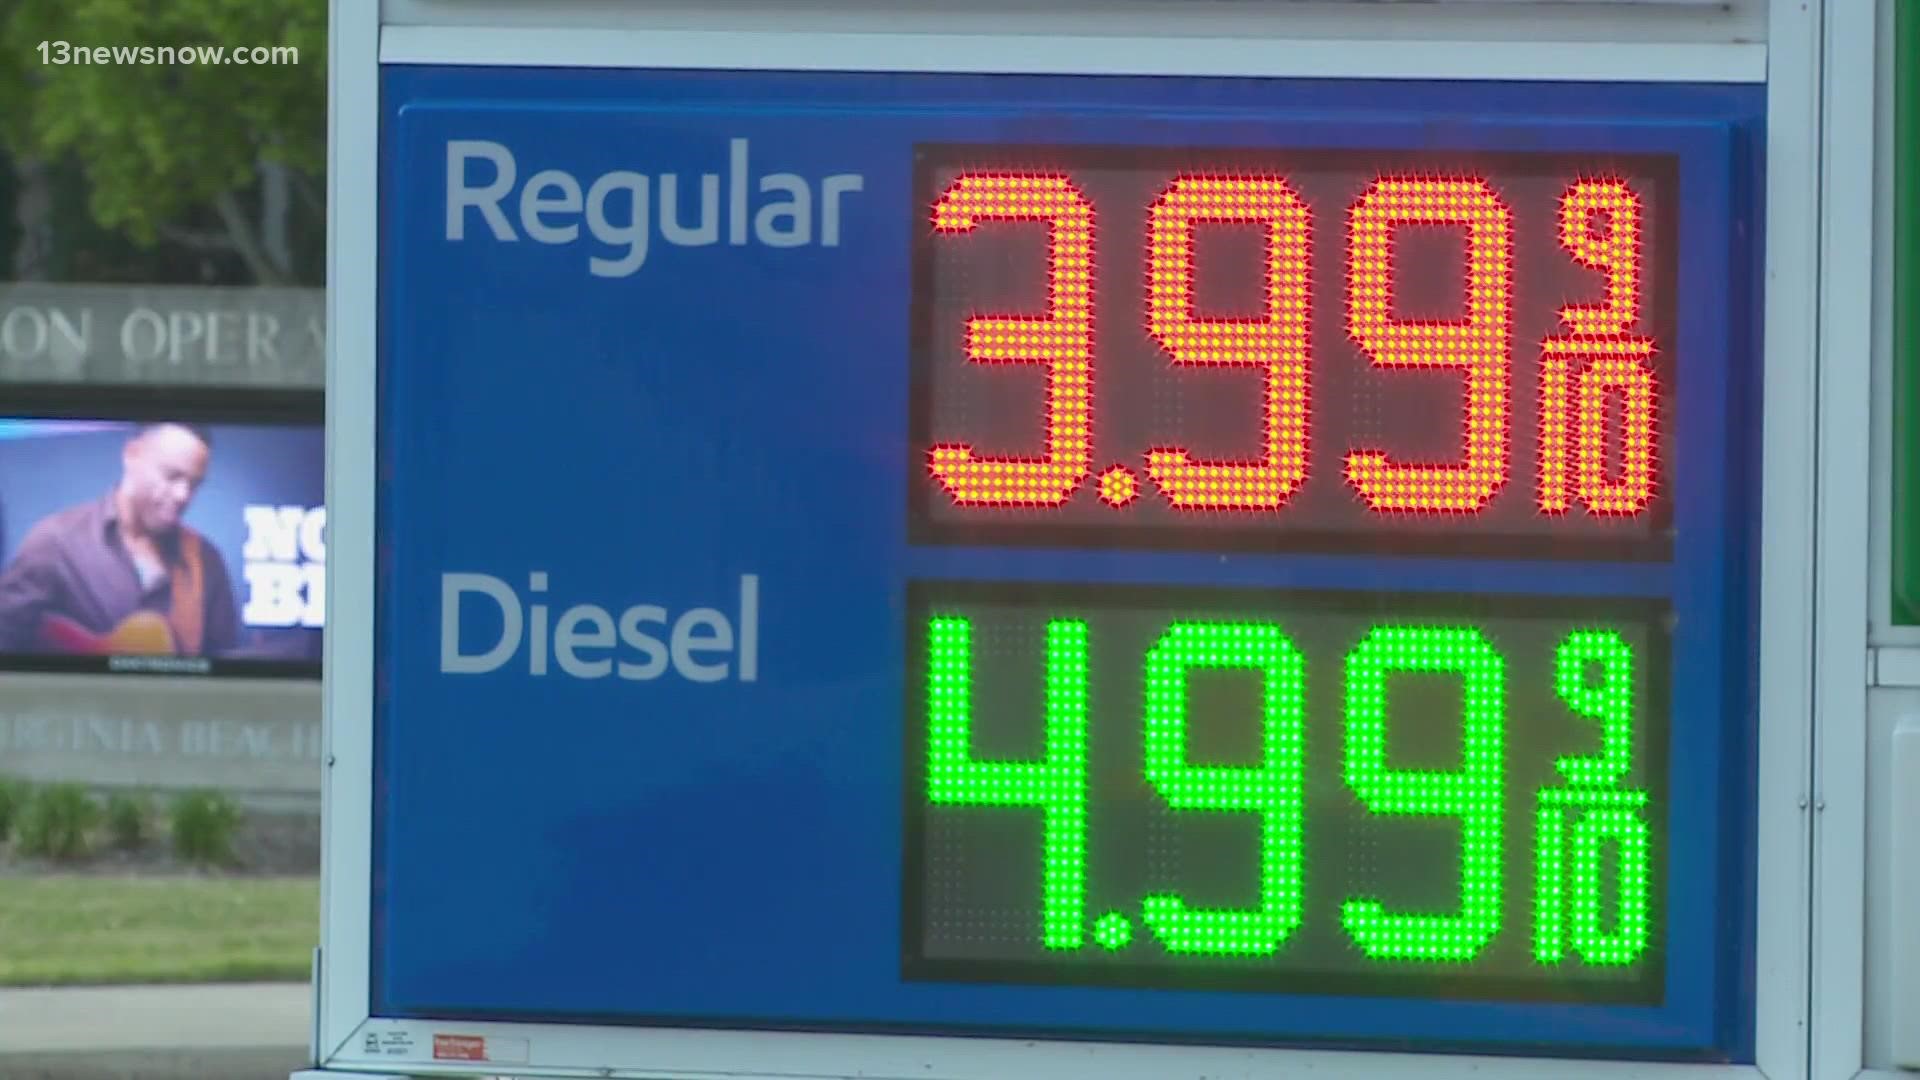 Tuesday's average was $3.95 per gallon, which is a two-cent drop from Monday. Despite a drop in its cost, the price of gasoline is still causing a lot of frustration